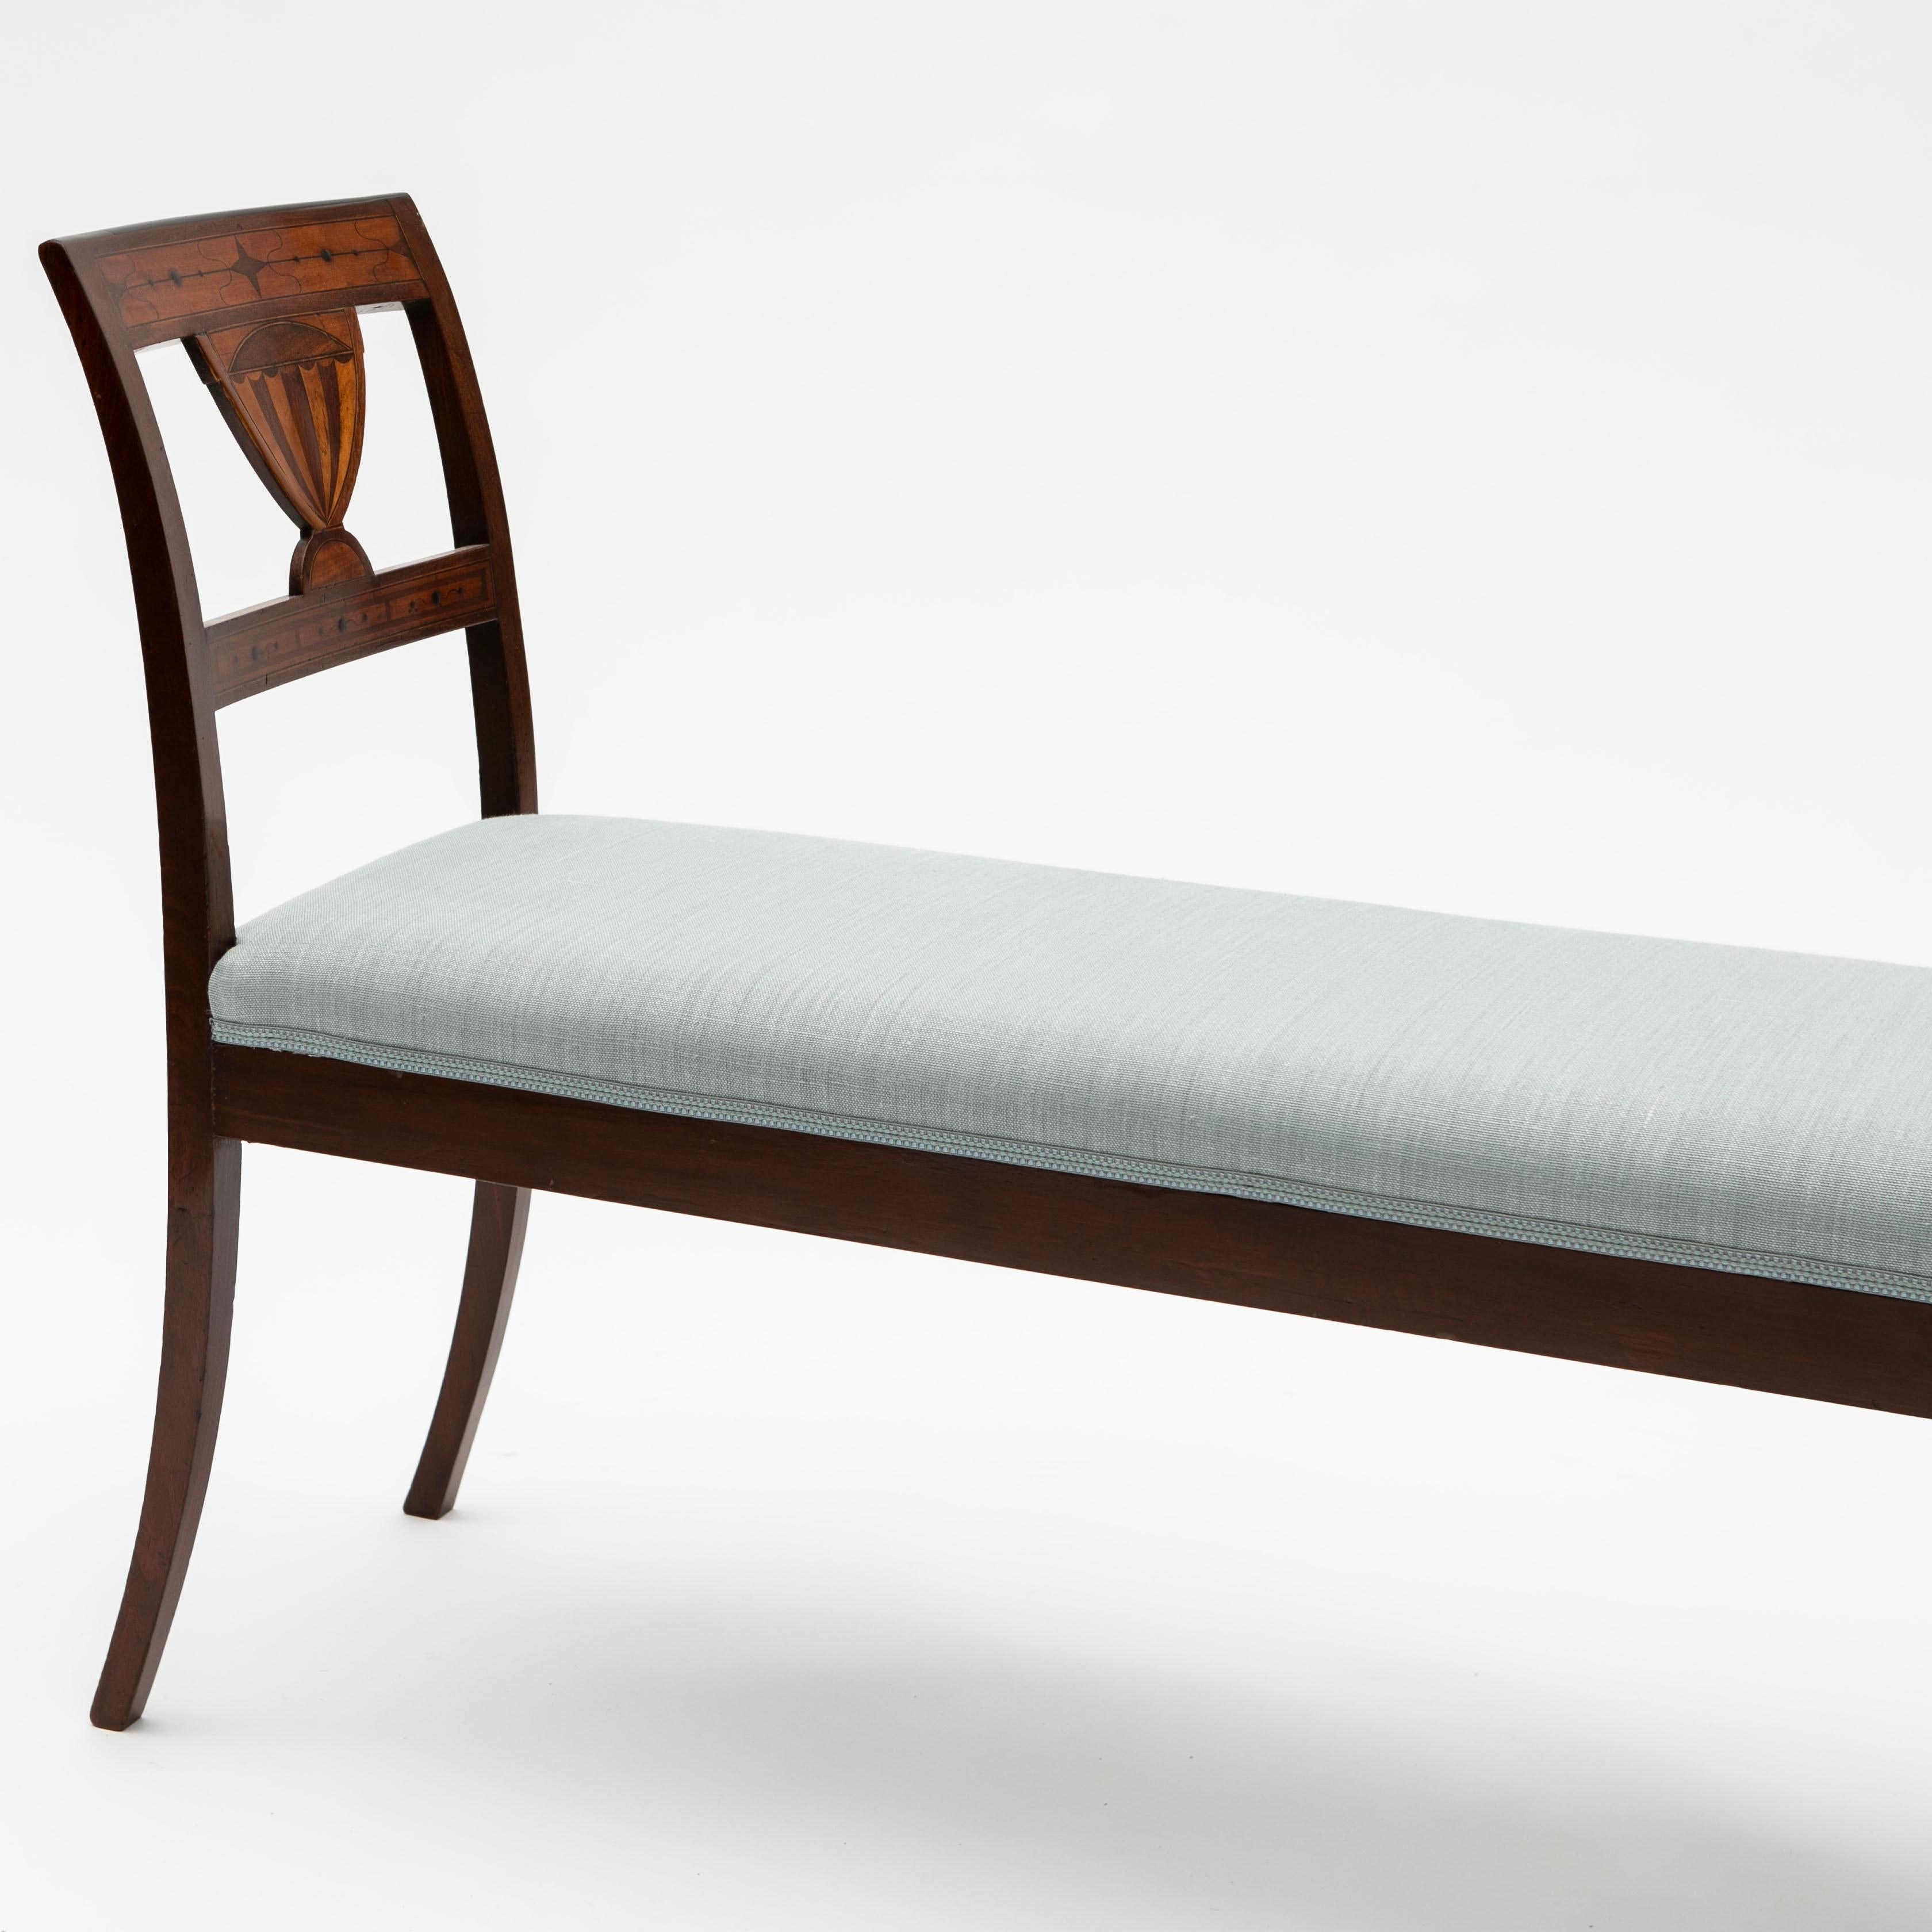 Danish Early 19th Century Mahogany Upholstered Seat Bench For Sale 1